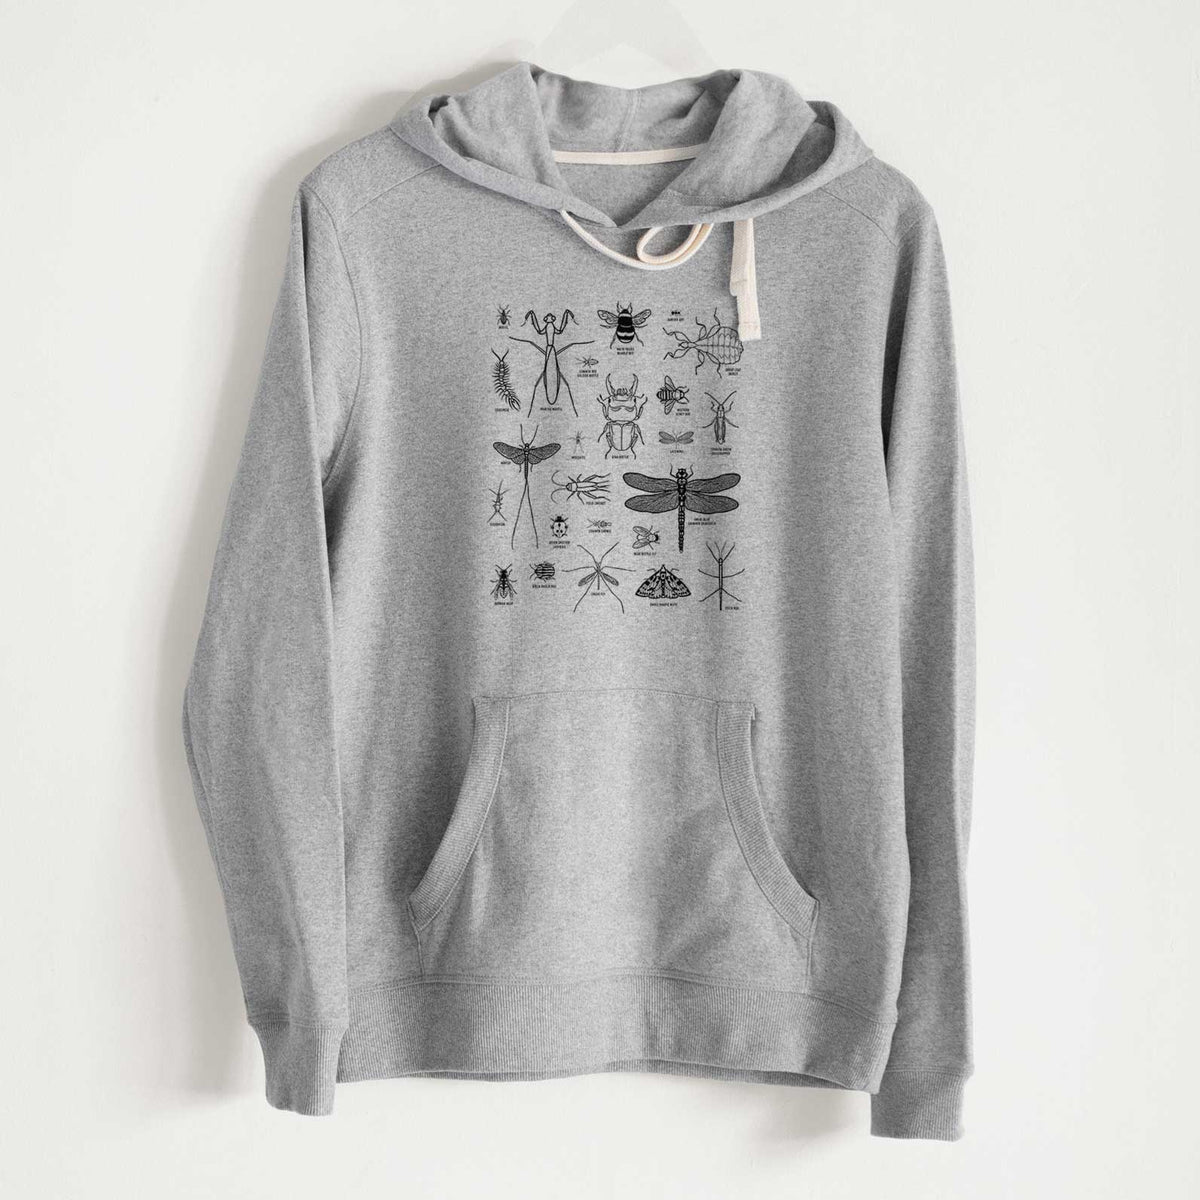 Chart of Arthropods/Insects - Unisex Recycled Hoodie - CLOSEOUT - FINAL SALE